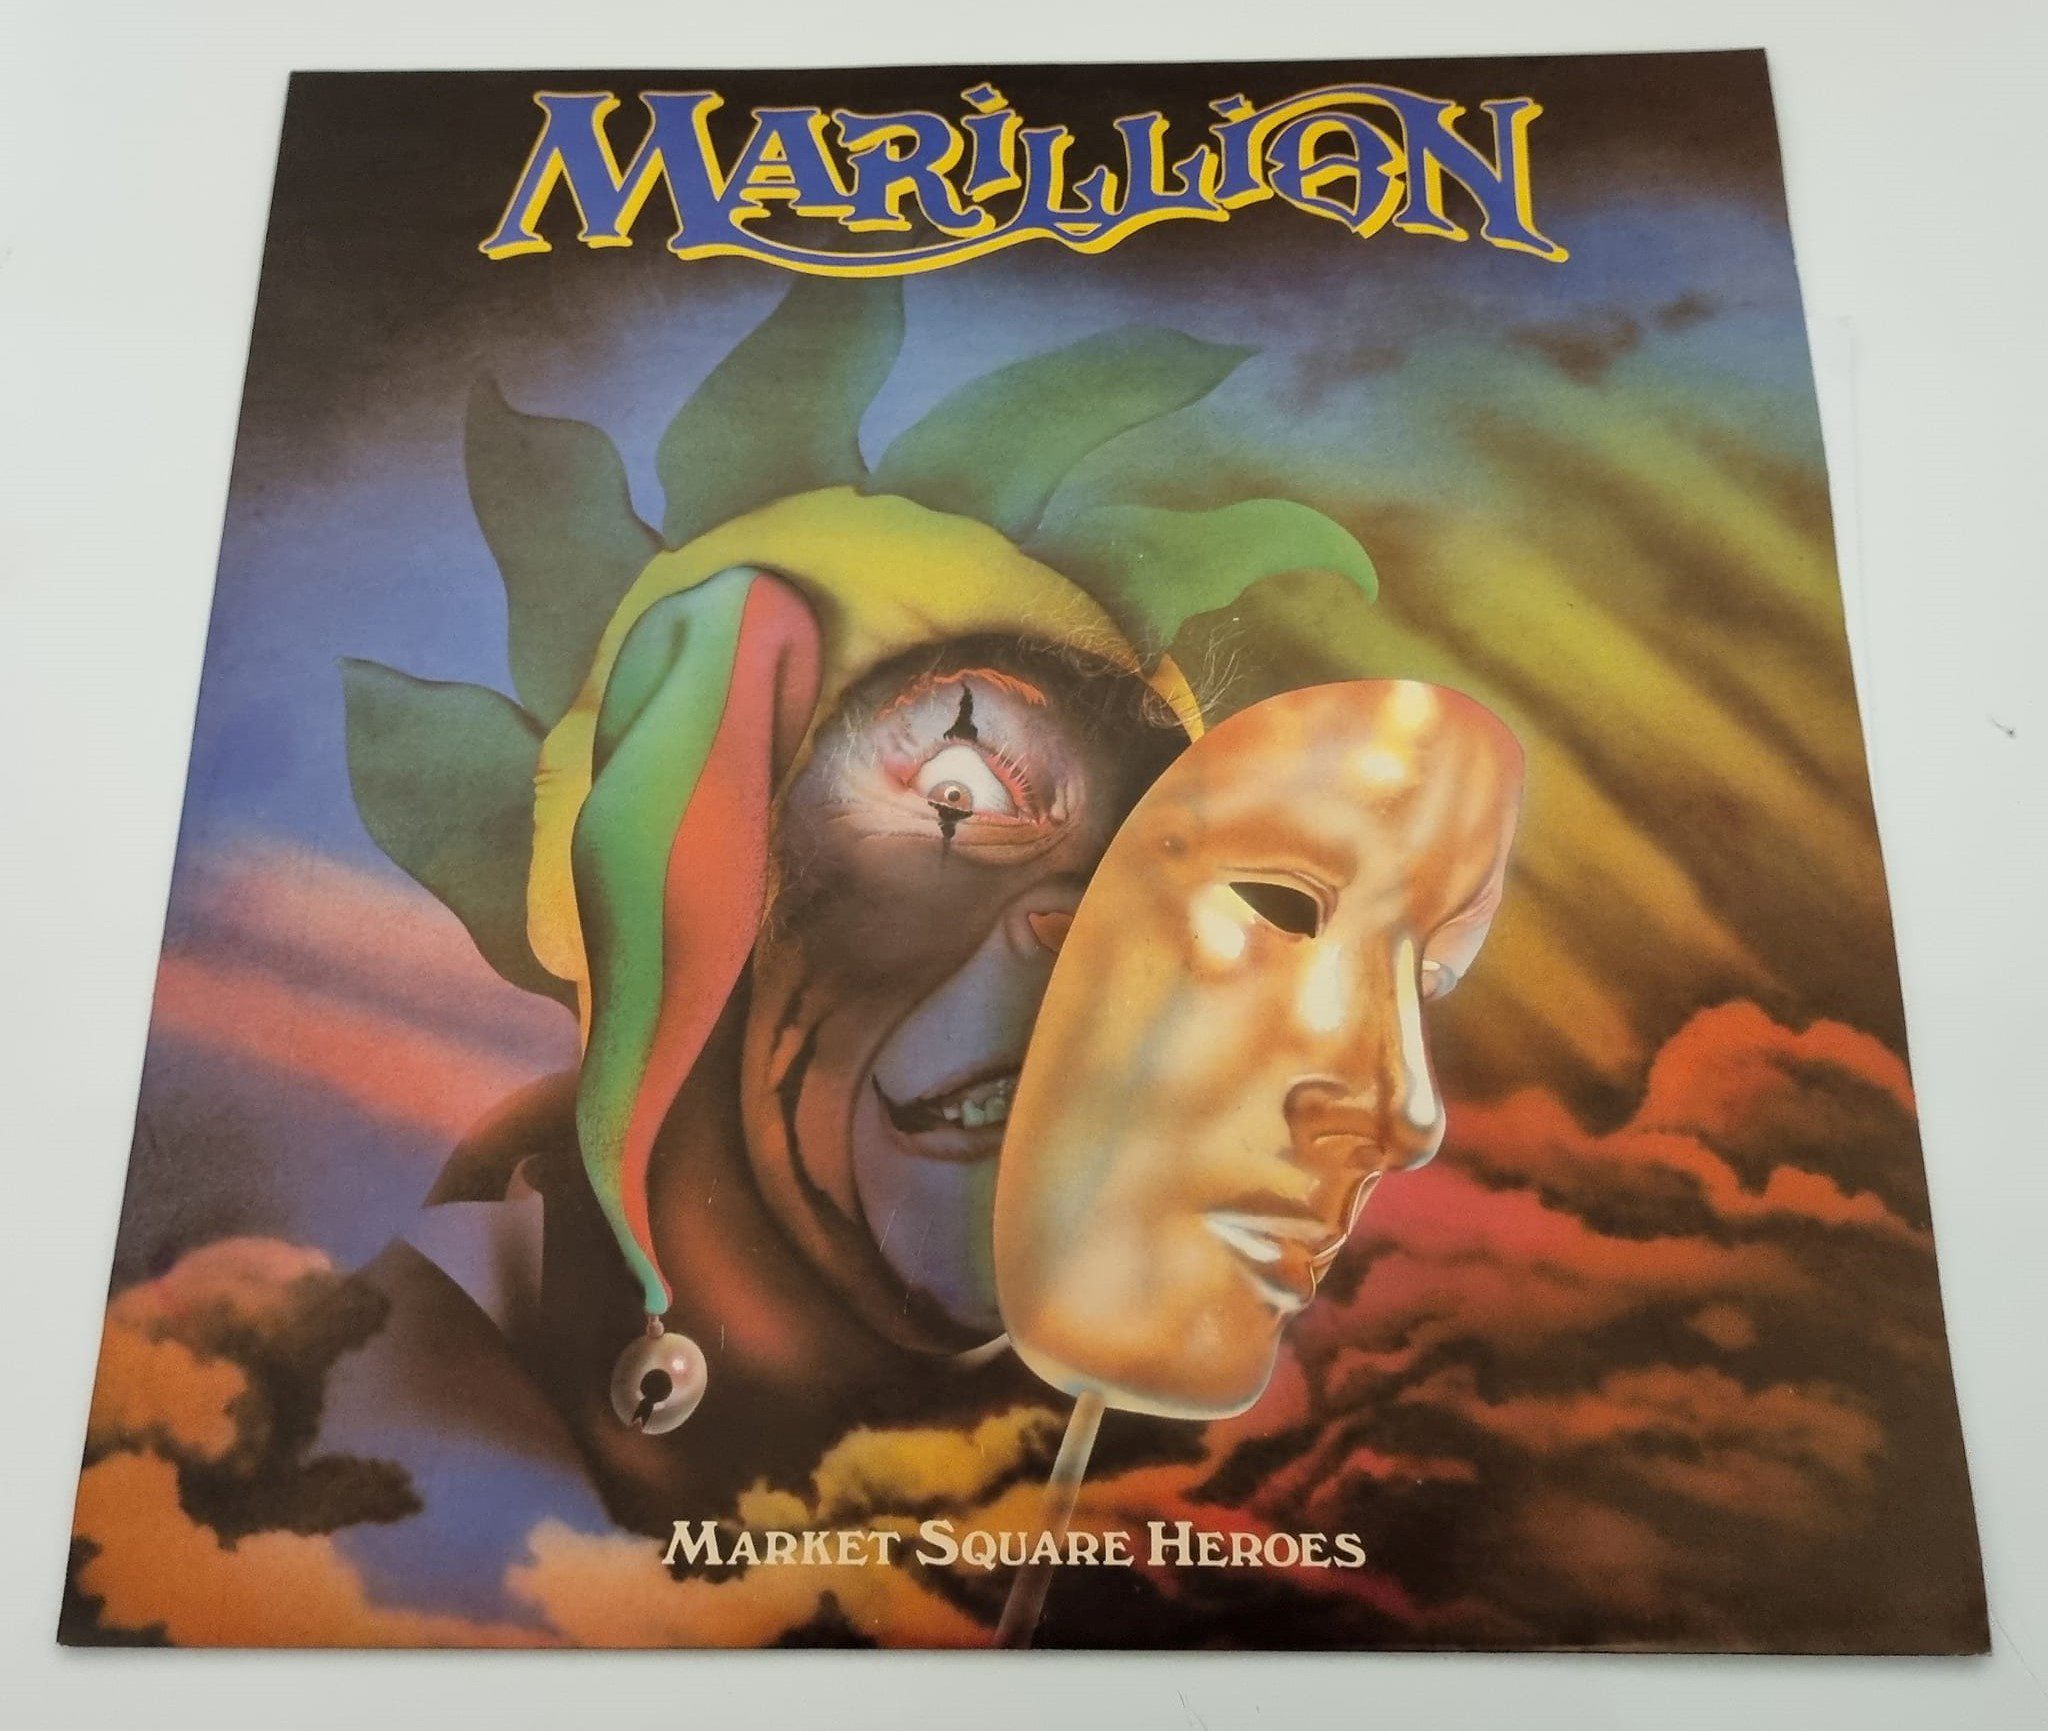 Buy this rare Marillion record by clicking here